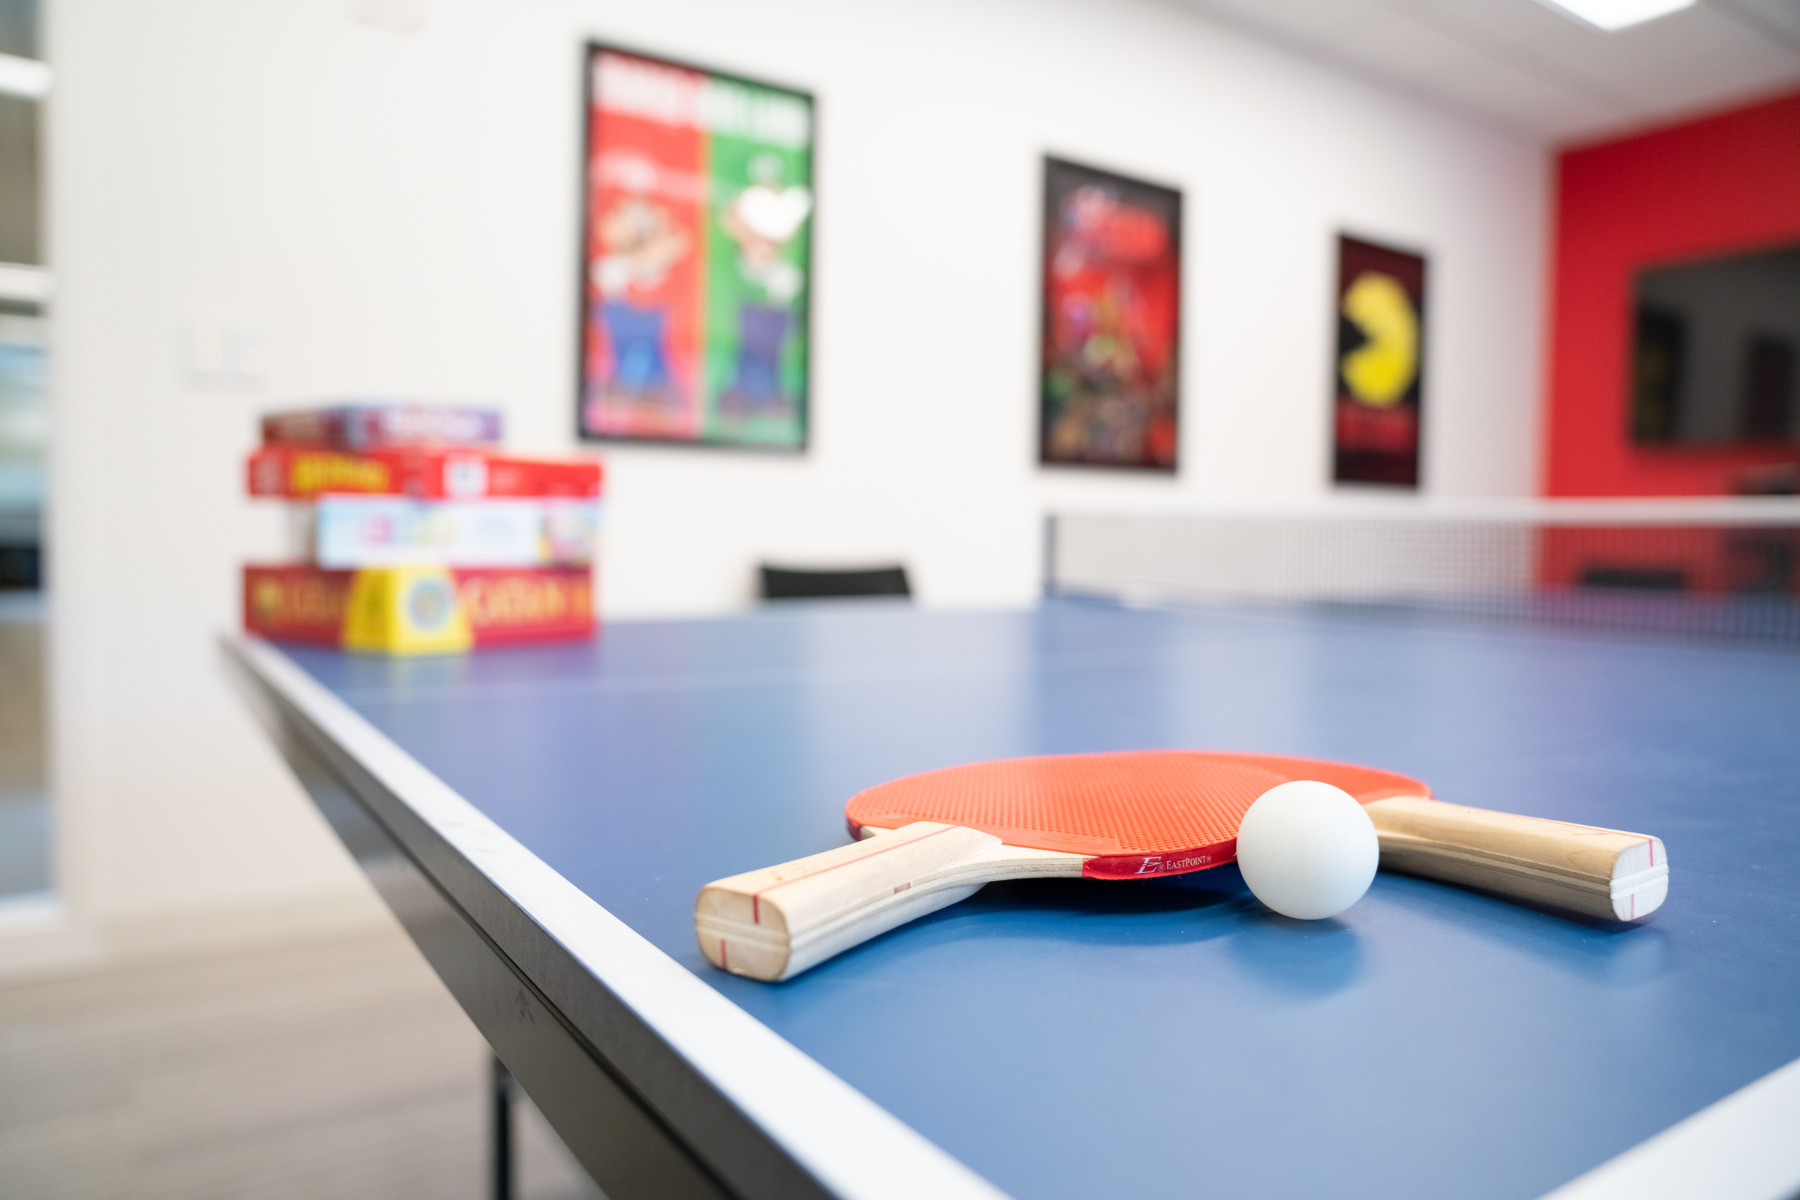 Image of paddles and a ball on a ping pong table in a game room